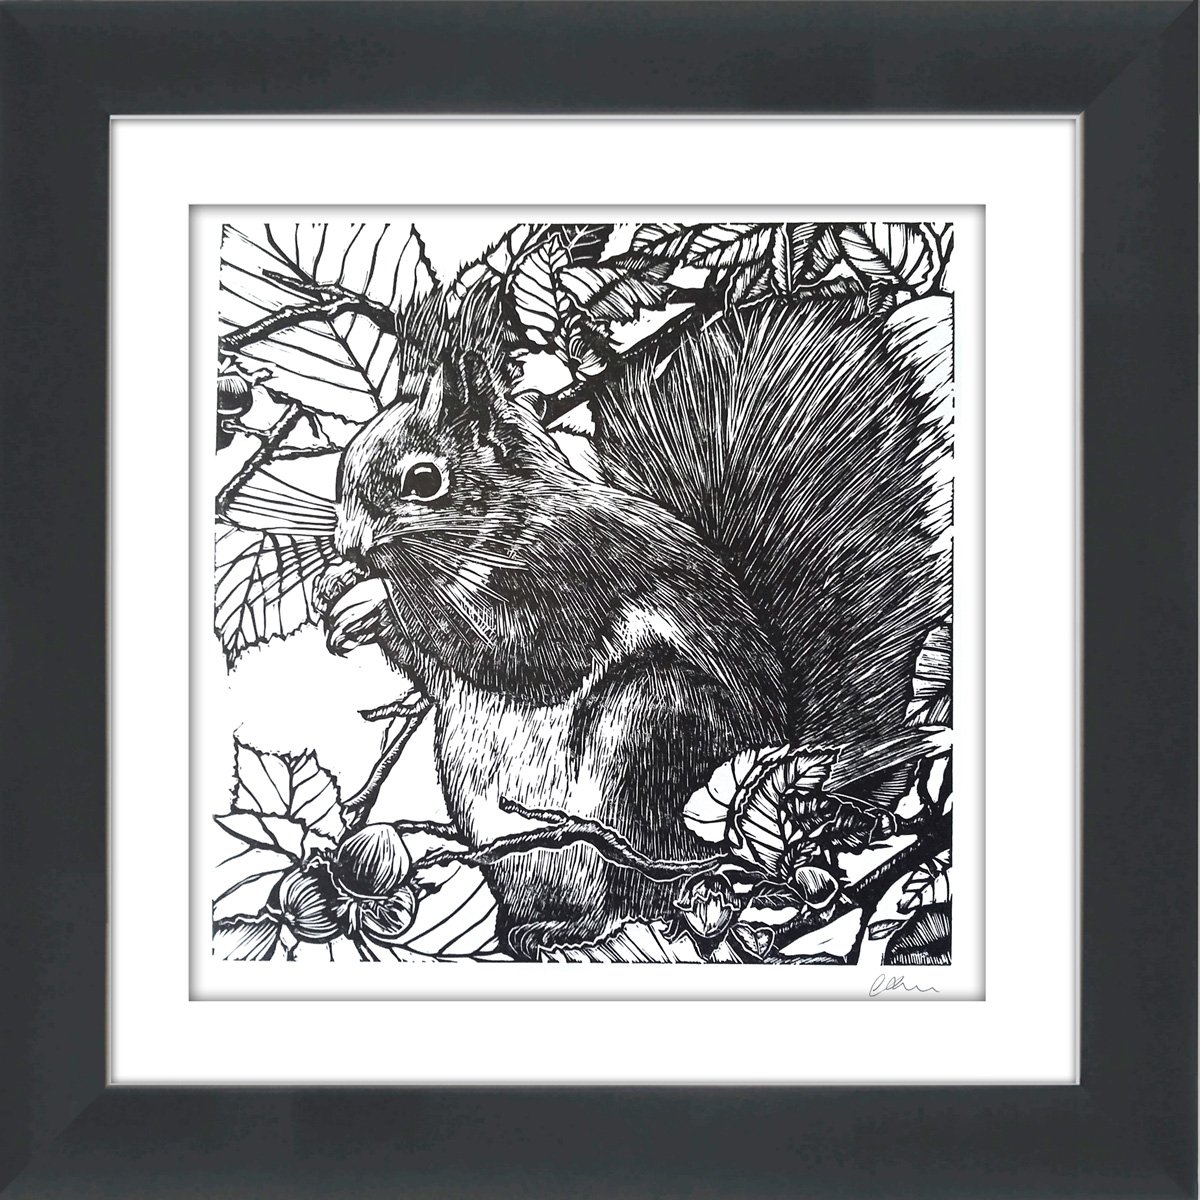 Natures feast- framed and ready to hang (black and white version - linocut red squirrel) by Carolynne Coulson